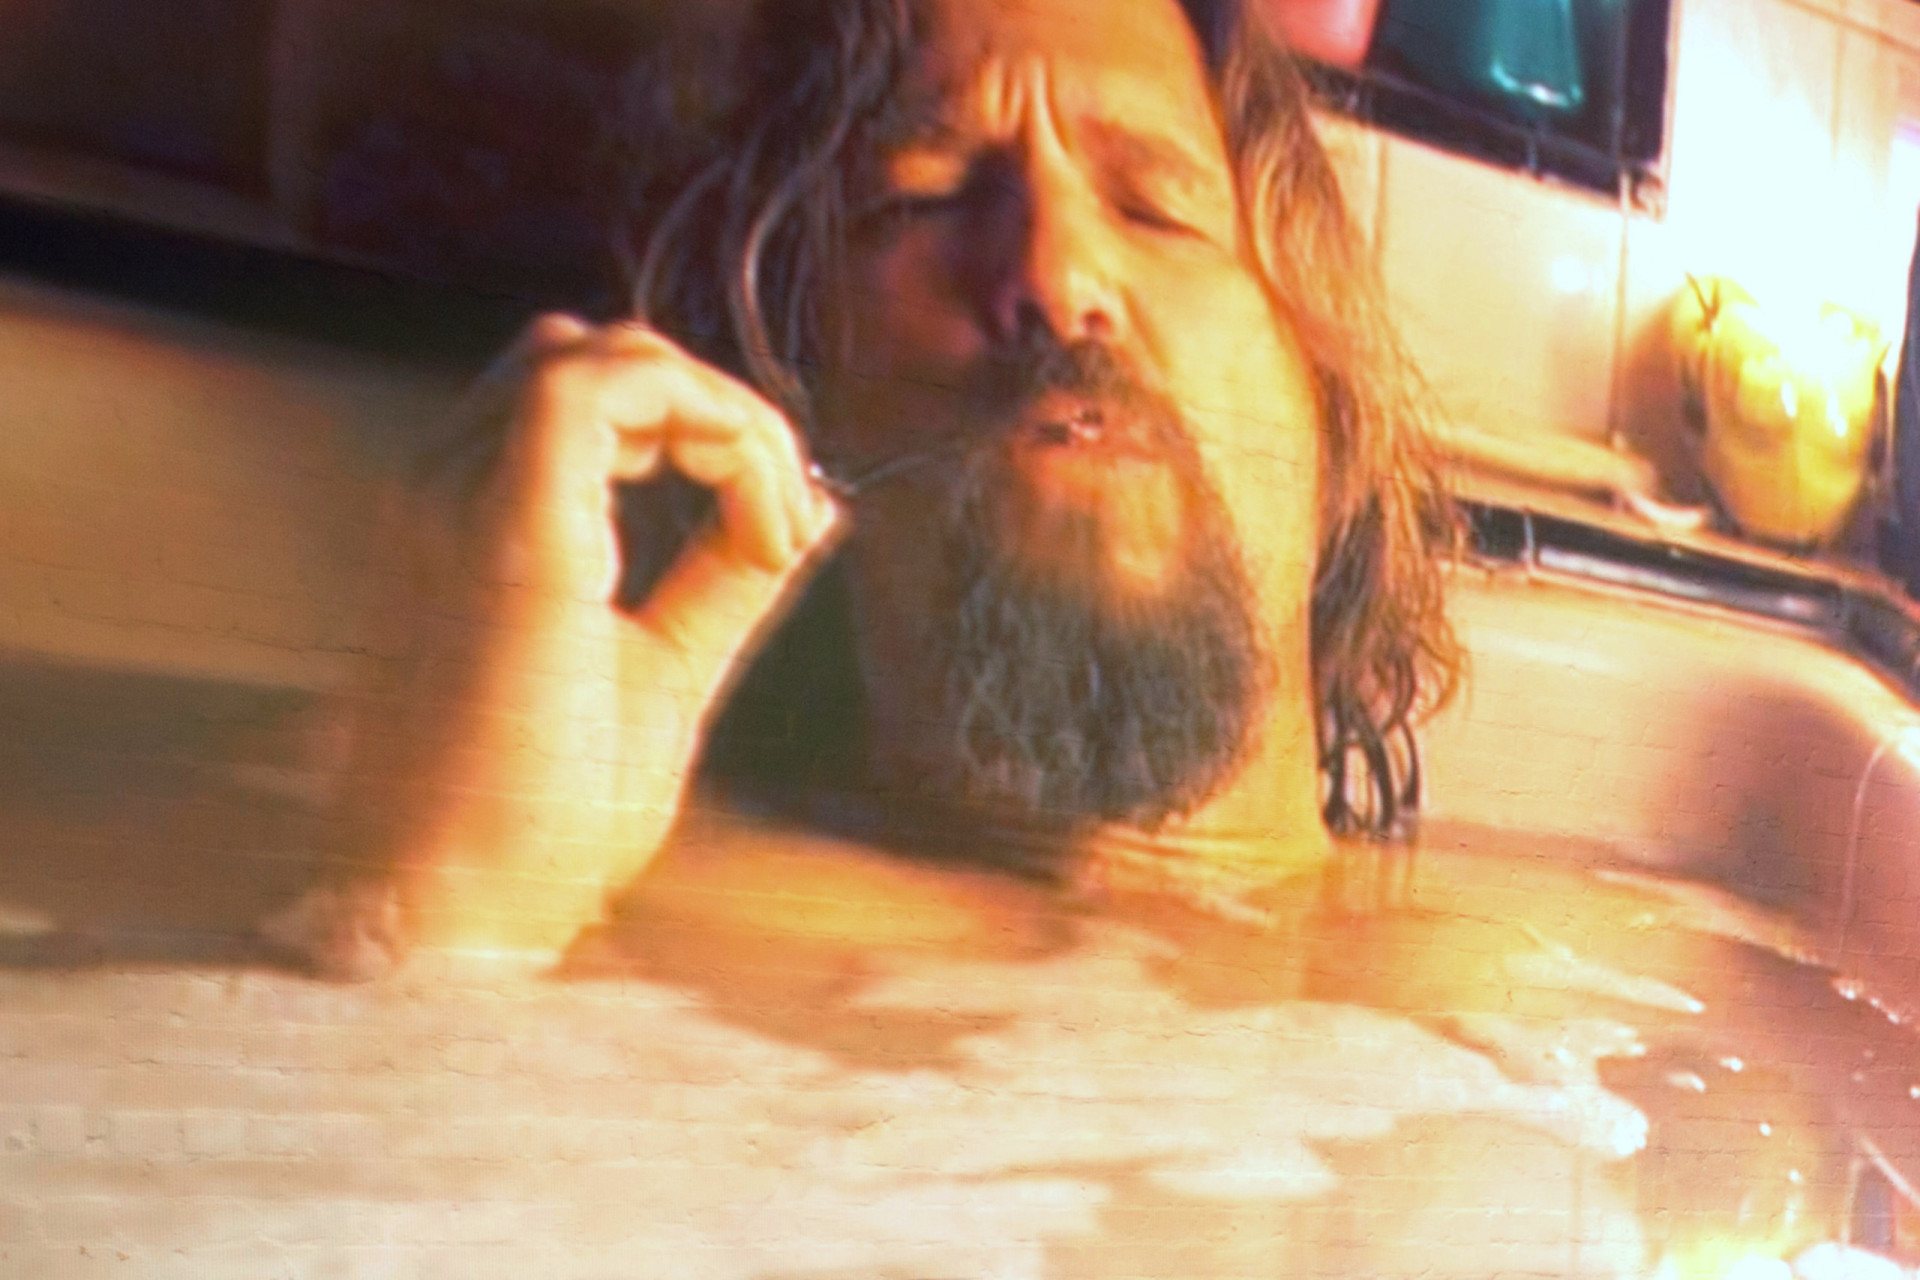 <p>Jeffrey "The Dude" Lebowski (Jeff Bridges) seeks solace in a hot bath, but his peace is shattered when a marmot is dropped into the tub.</p><p><a href="https://www.msn.com/en-us/community/channel/vid-7xx8mnucu55yw63we9va2gwr7uihbxwc68fxqp25x6tg4ftibpra?cvid=94631541bc0f4f89bfd59158d696ad7e">Follow us and access great exclusive content every day</a></p>